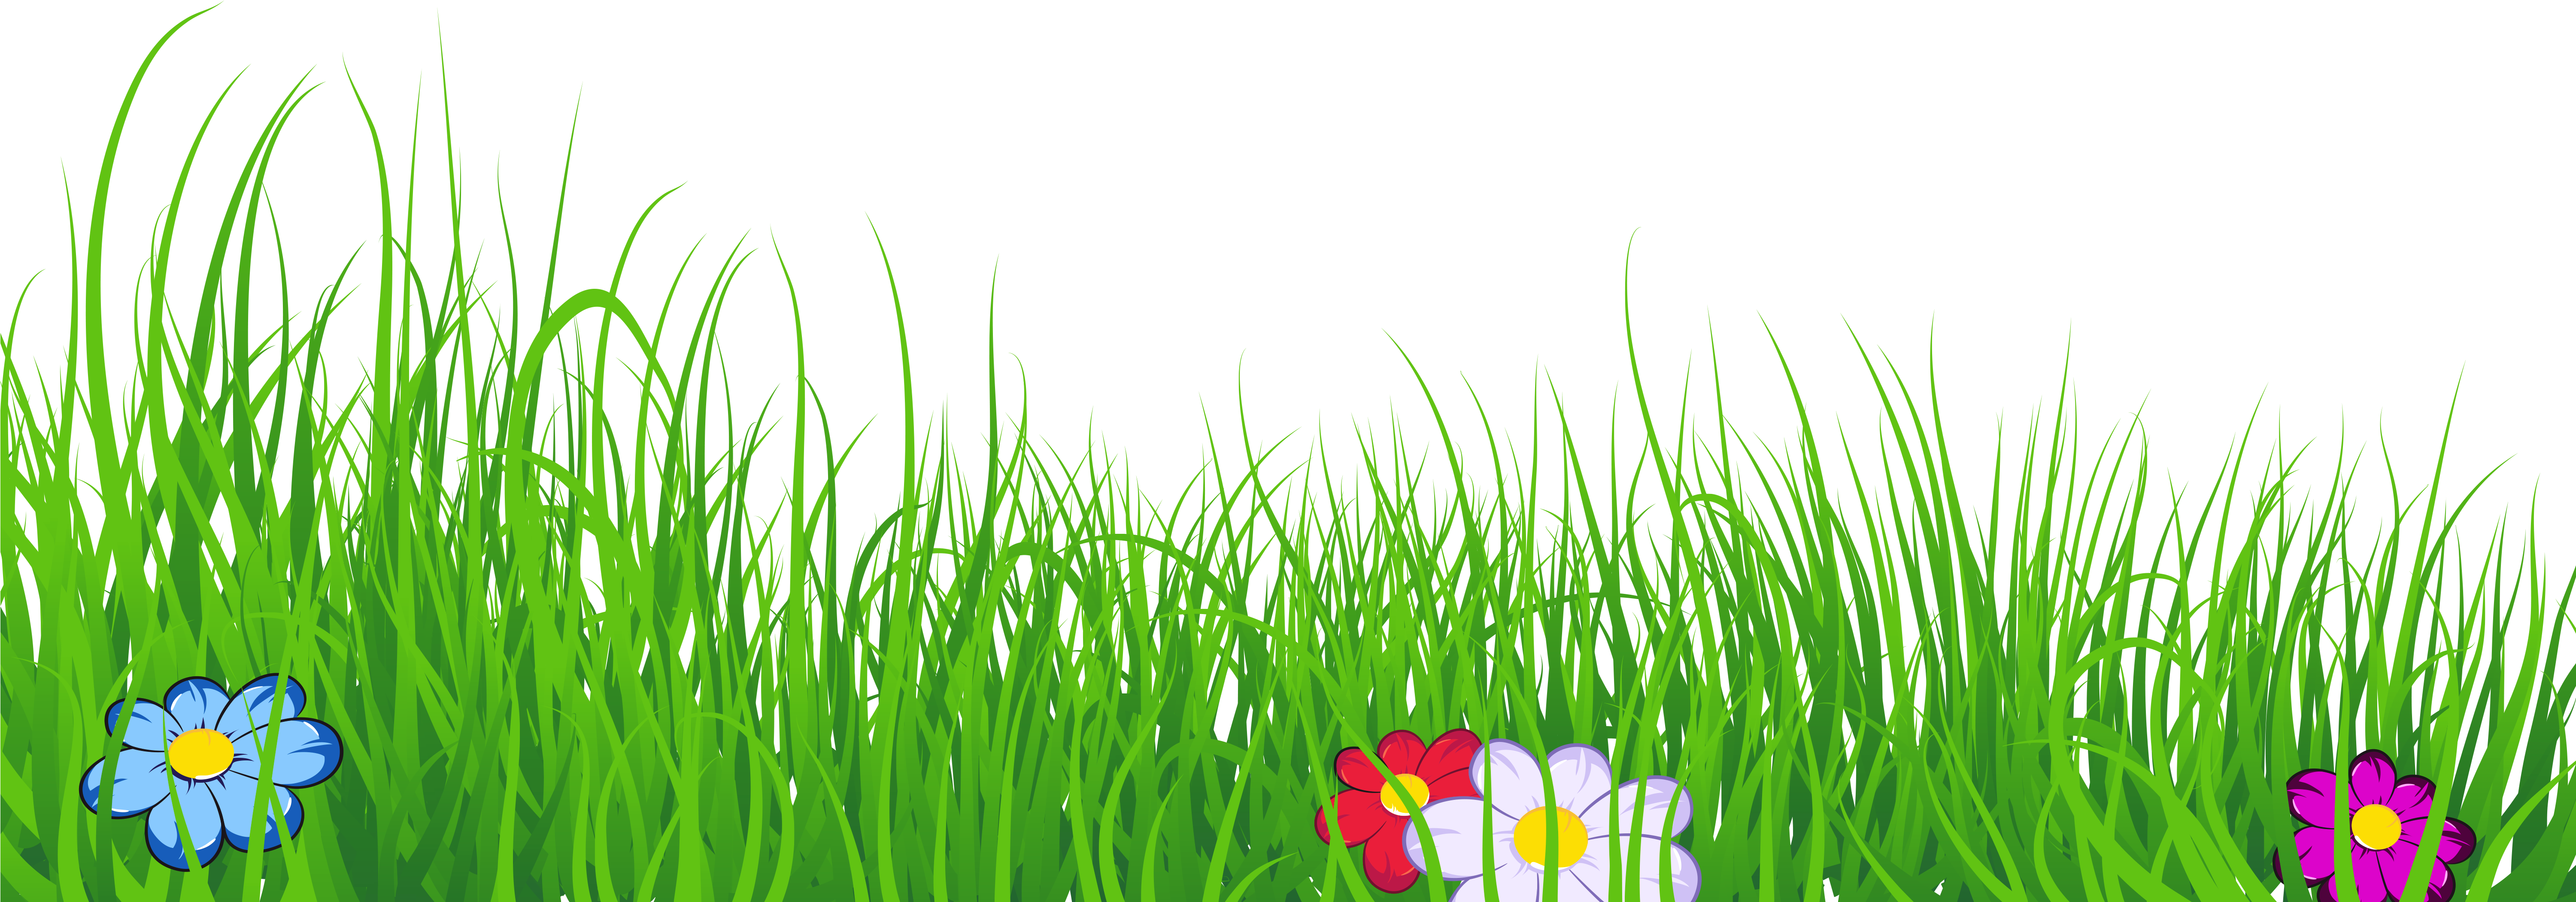 Download Ground Clipart Clear Background Grass.